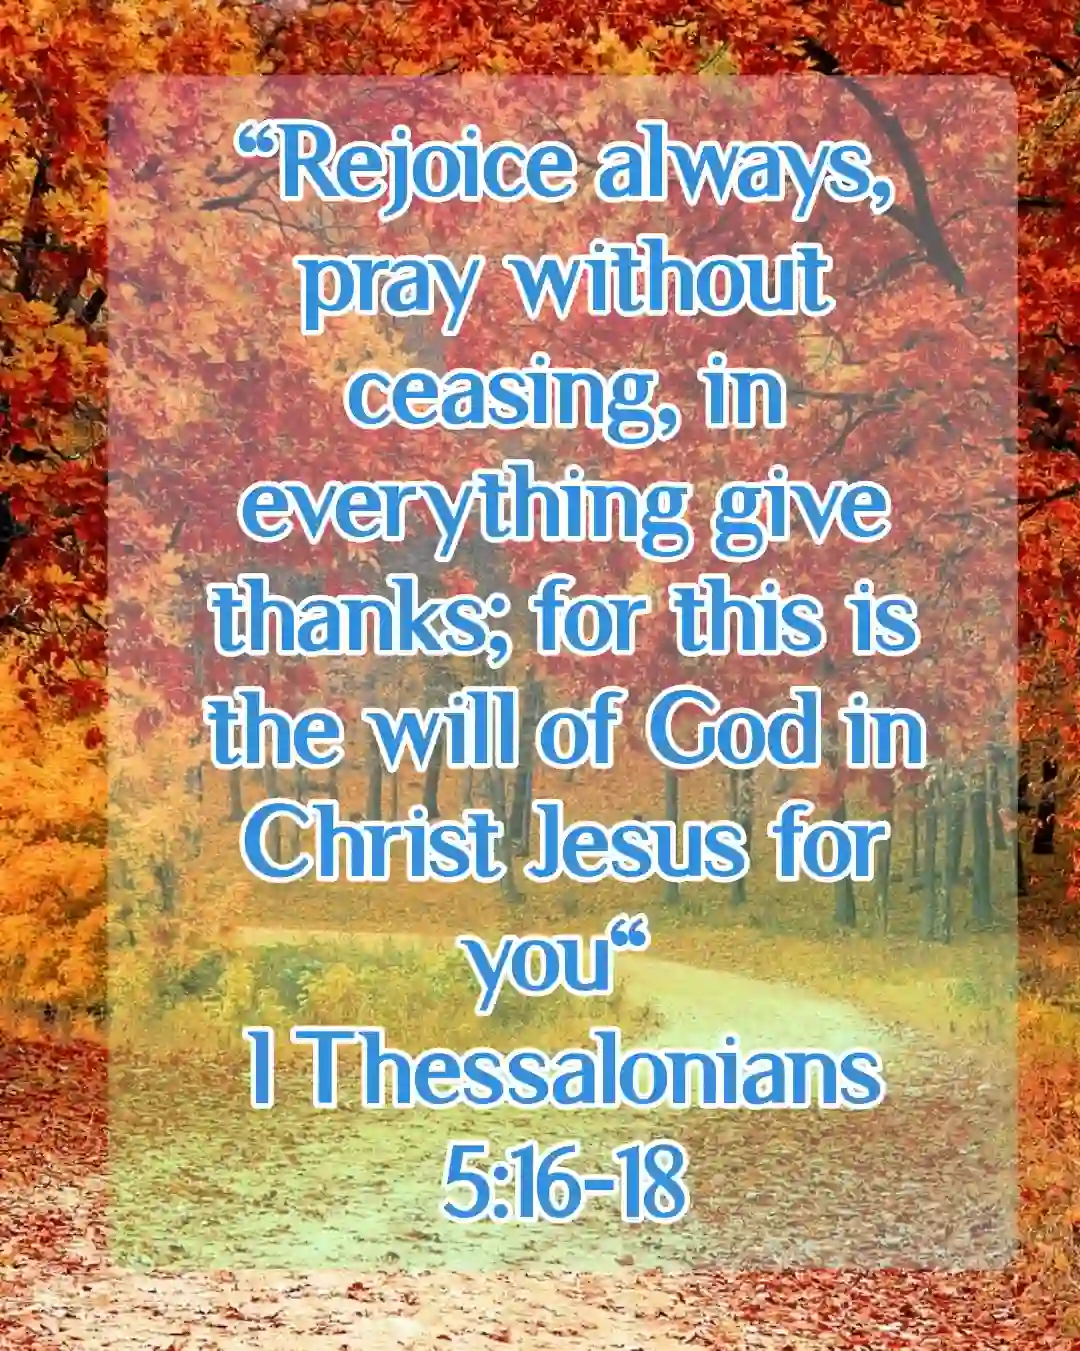 bible-verses-for-thanksgiving (1 Thessalonians 5:16-18)